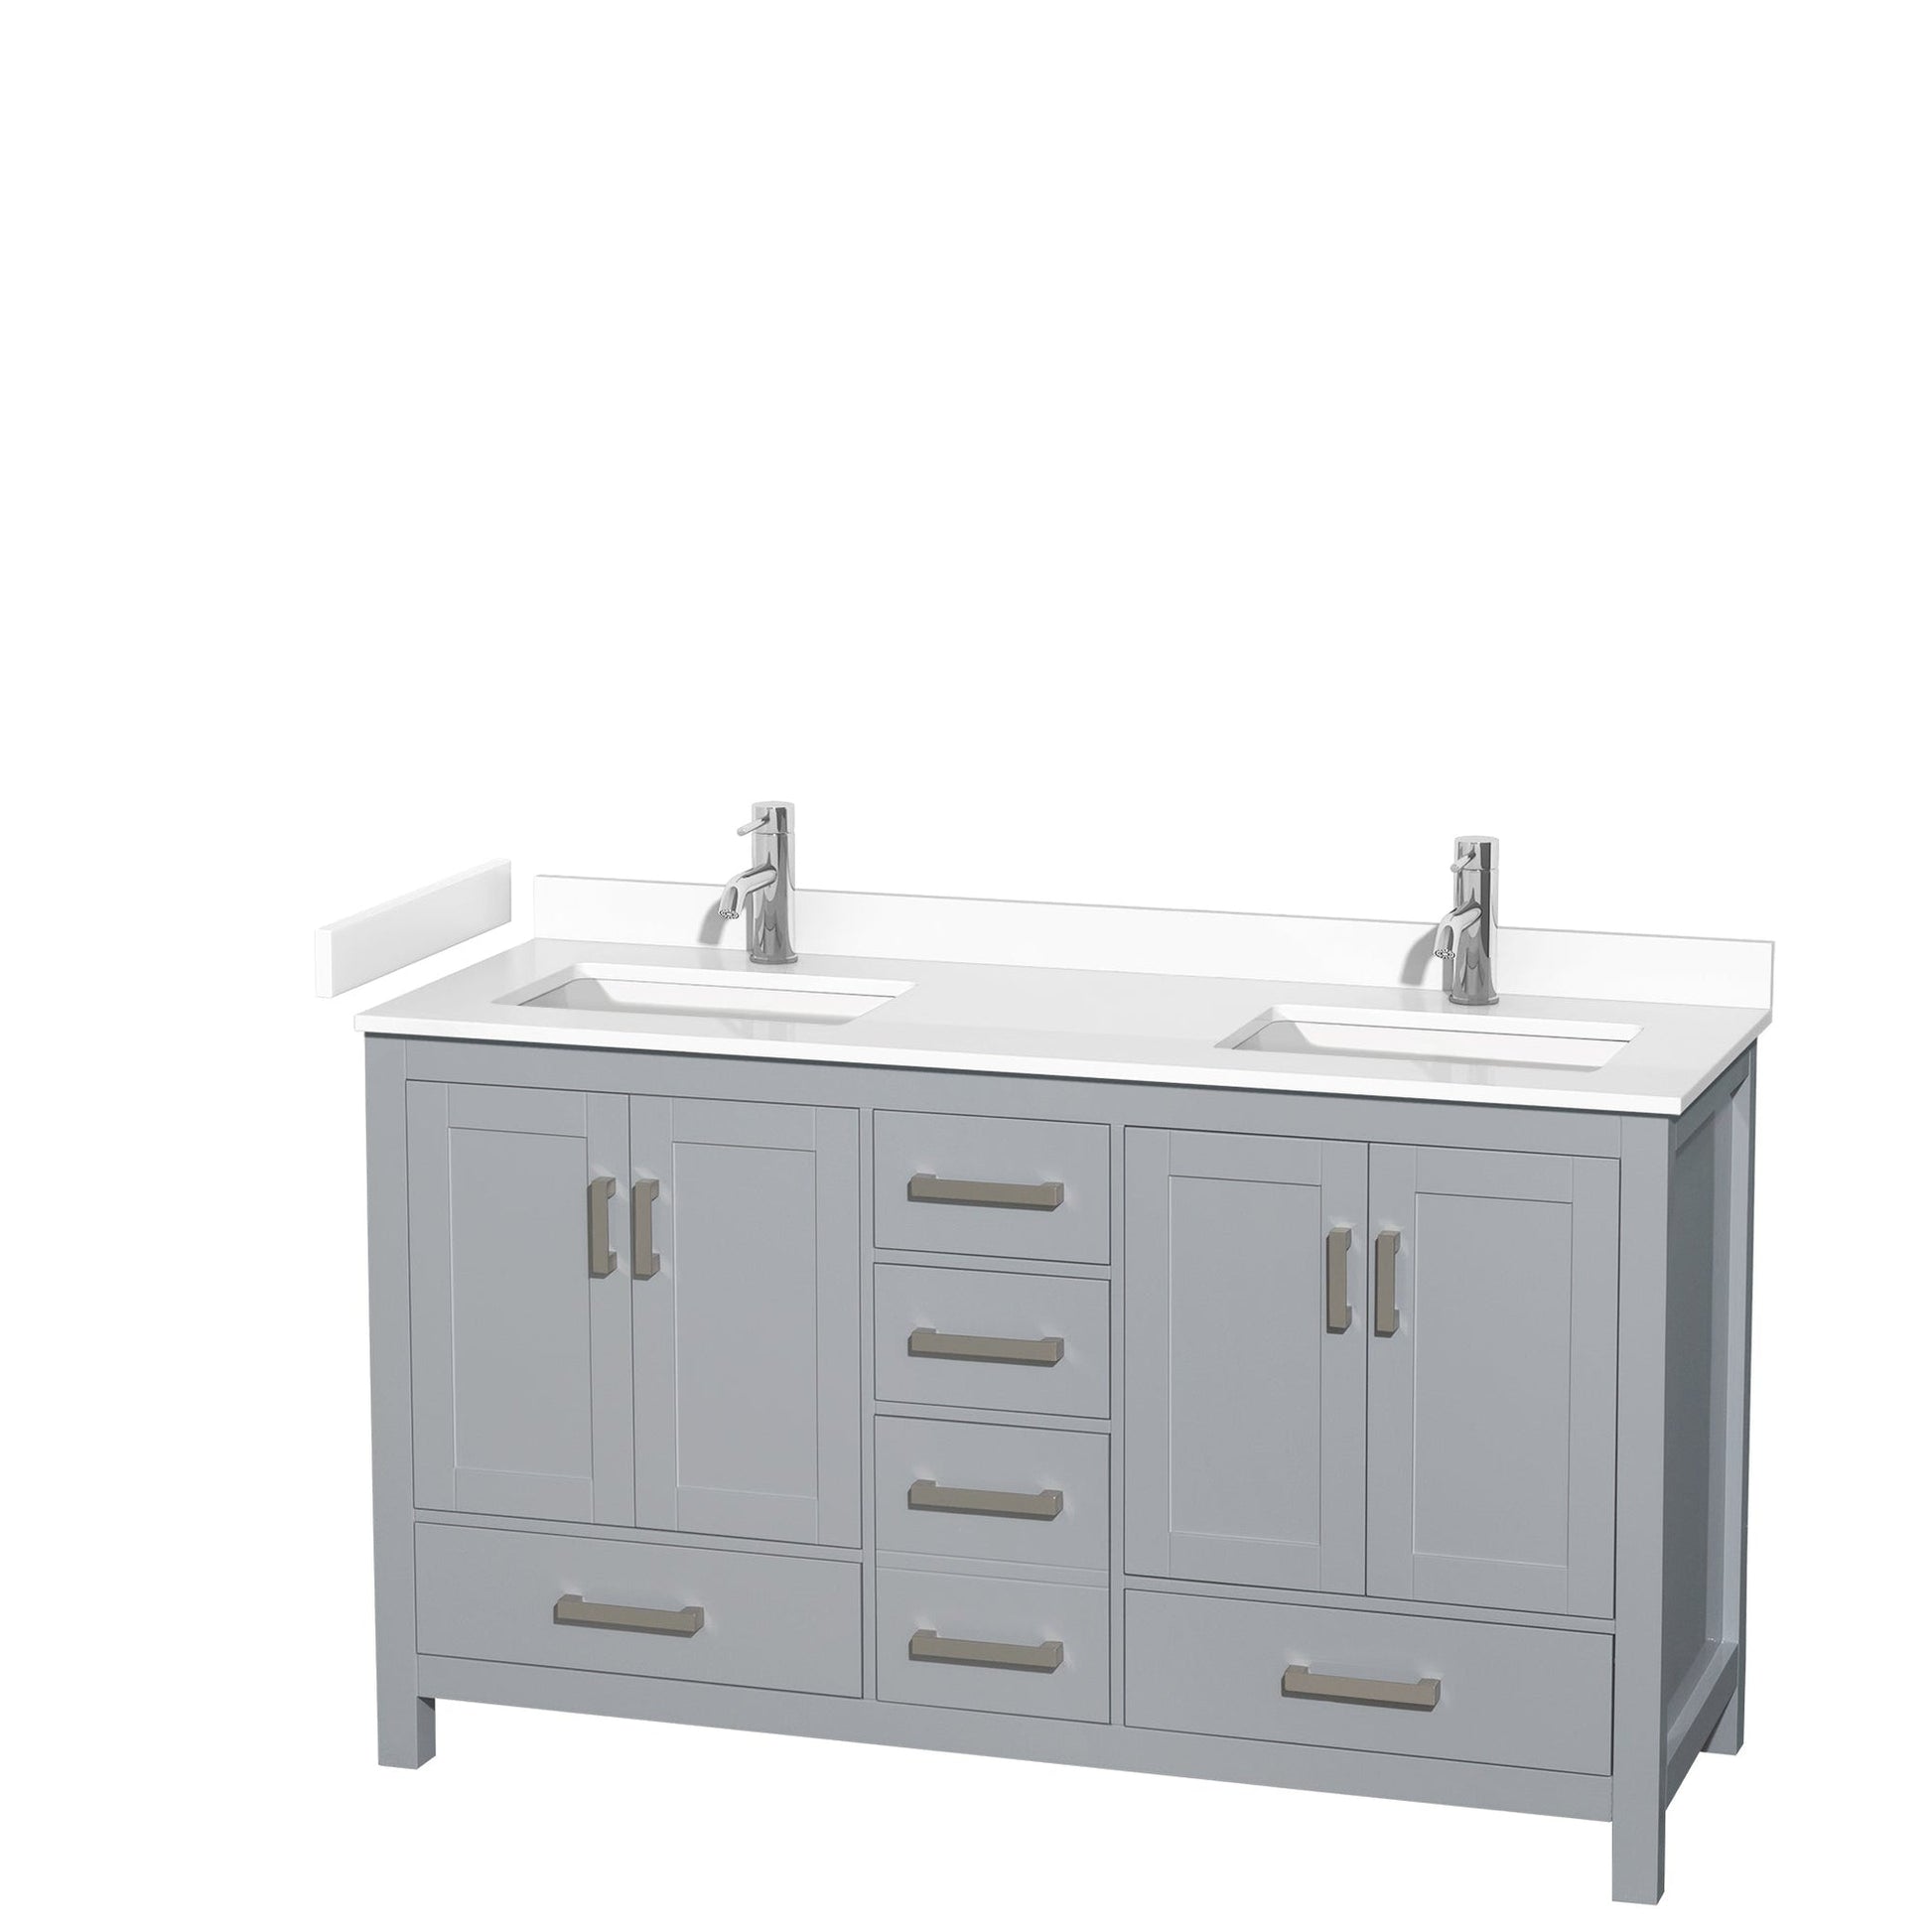 Wyndham Collection Sheffield 60" Double Bathroom Vanity in Gray, White Cultured Marble Countertop, Undermount Square Sinks, No Mirror